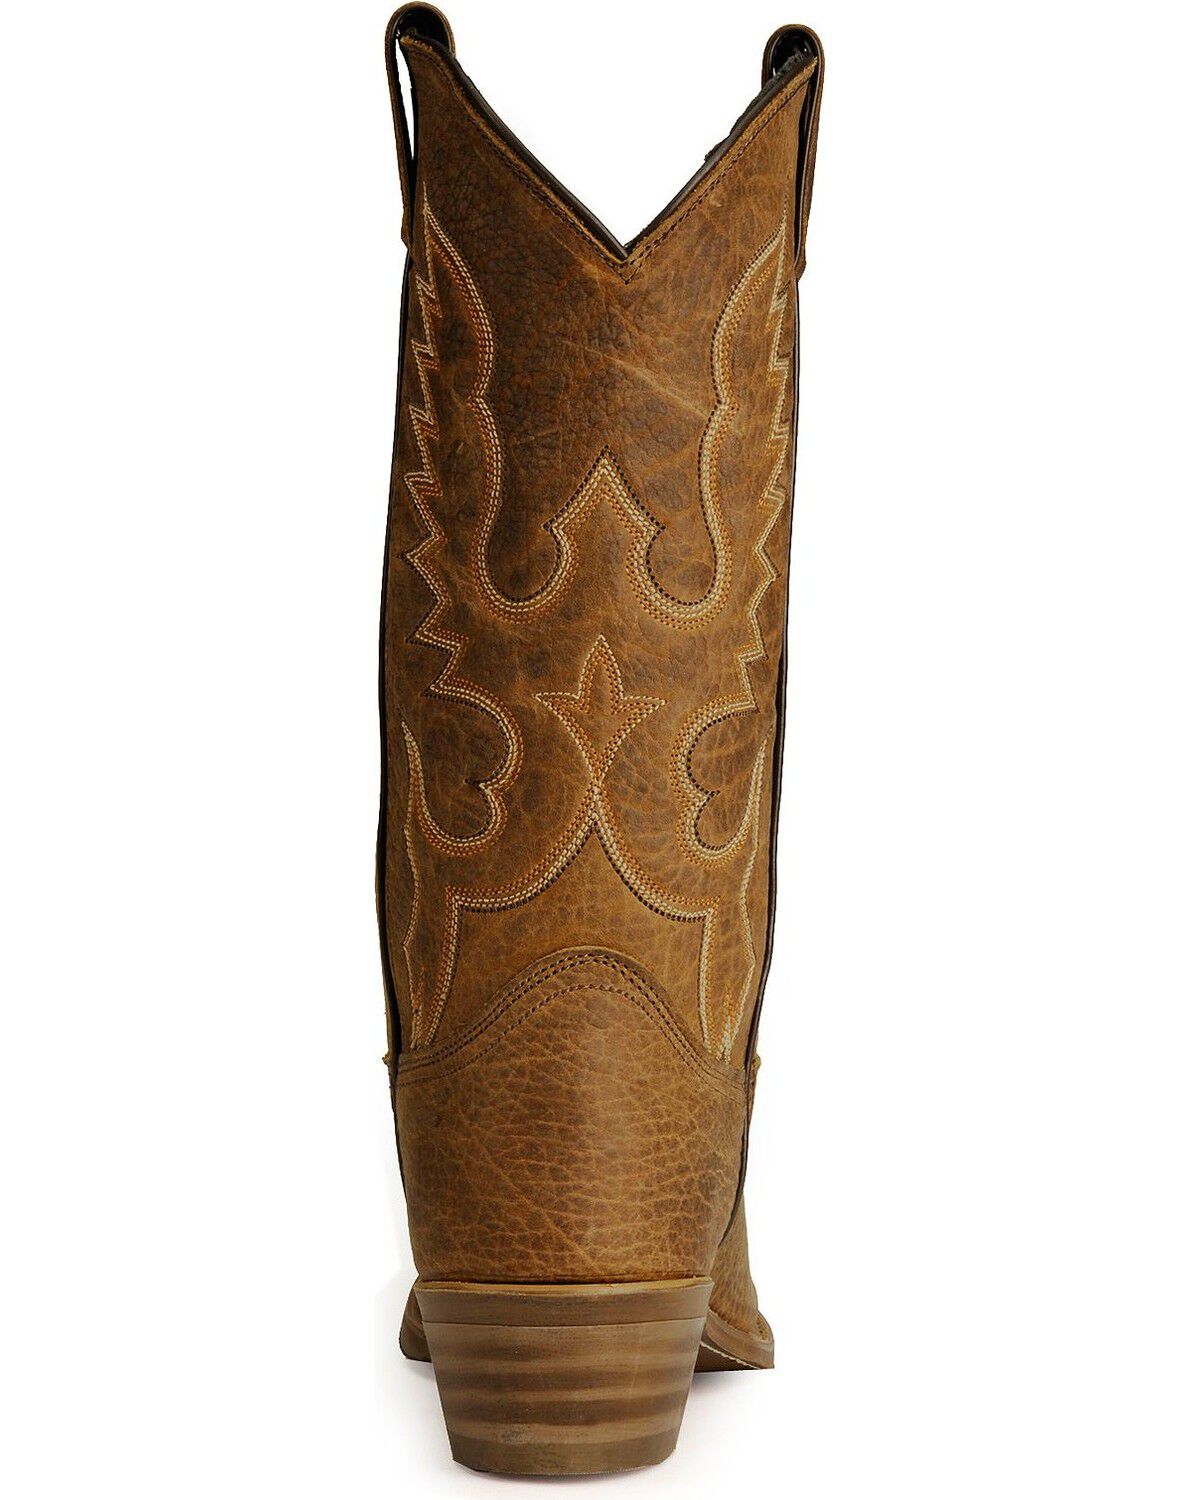 bison leather cowboy boots